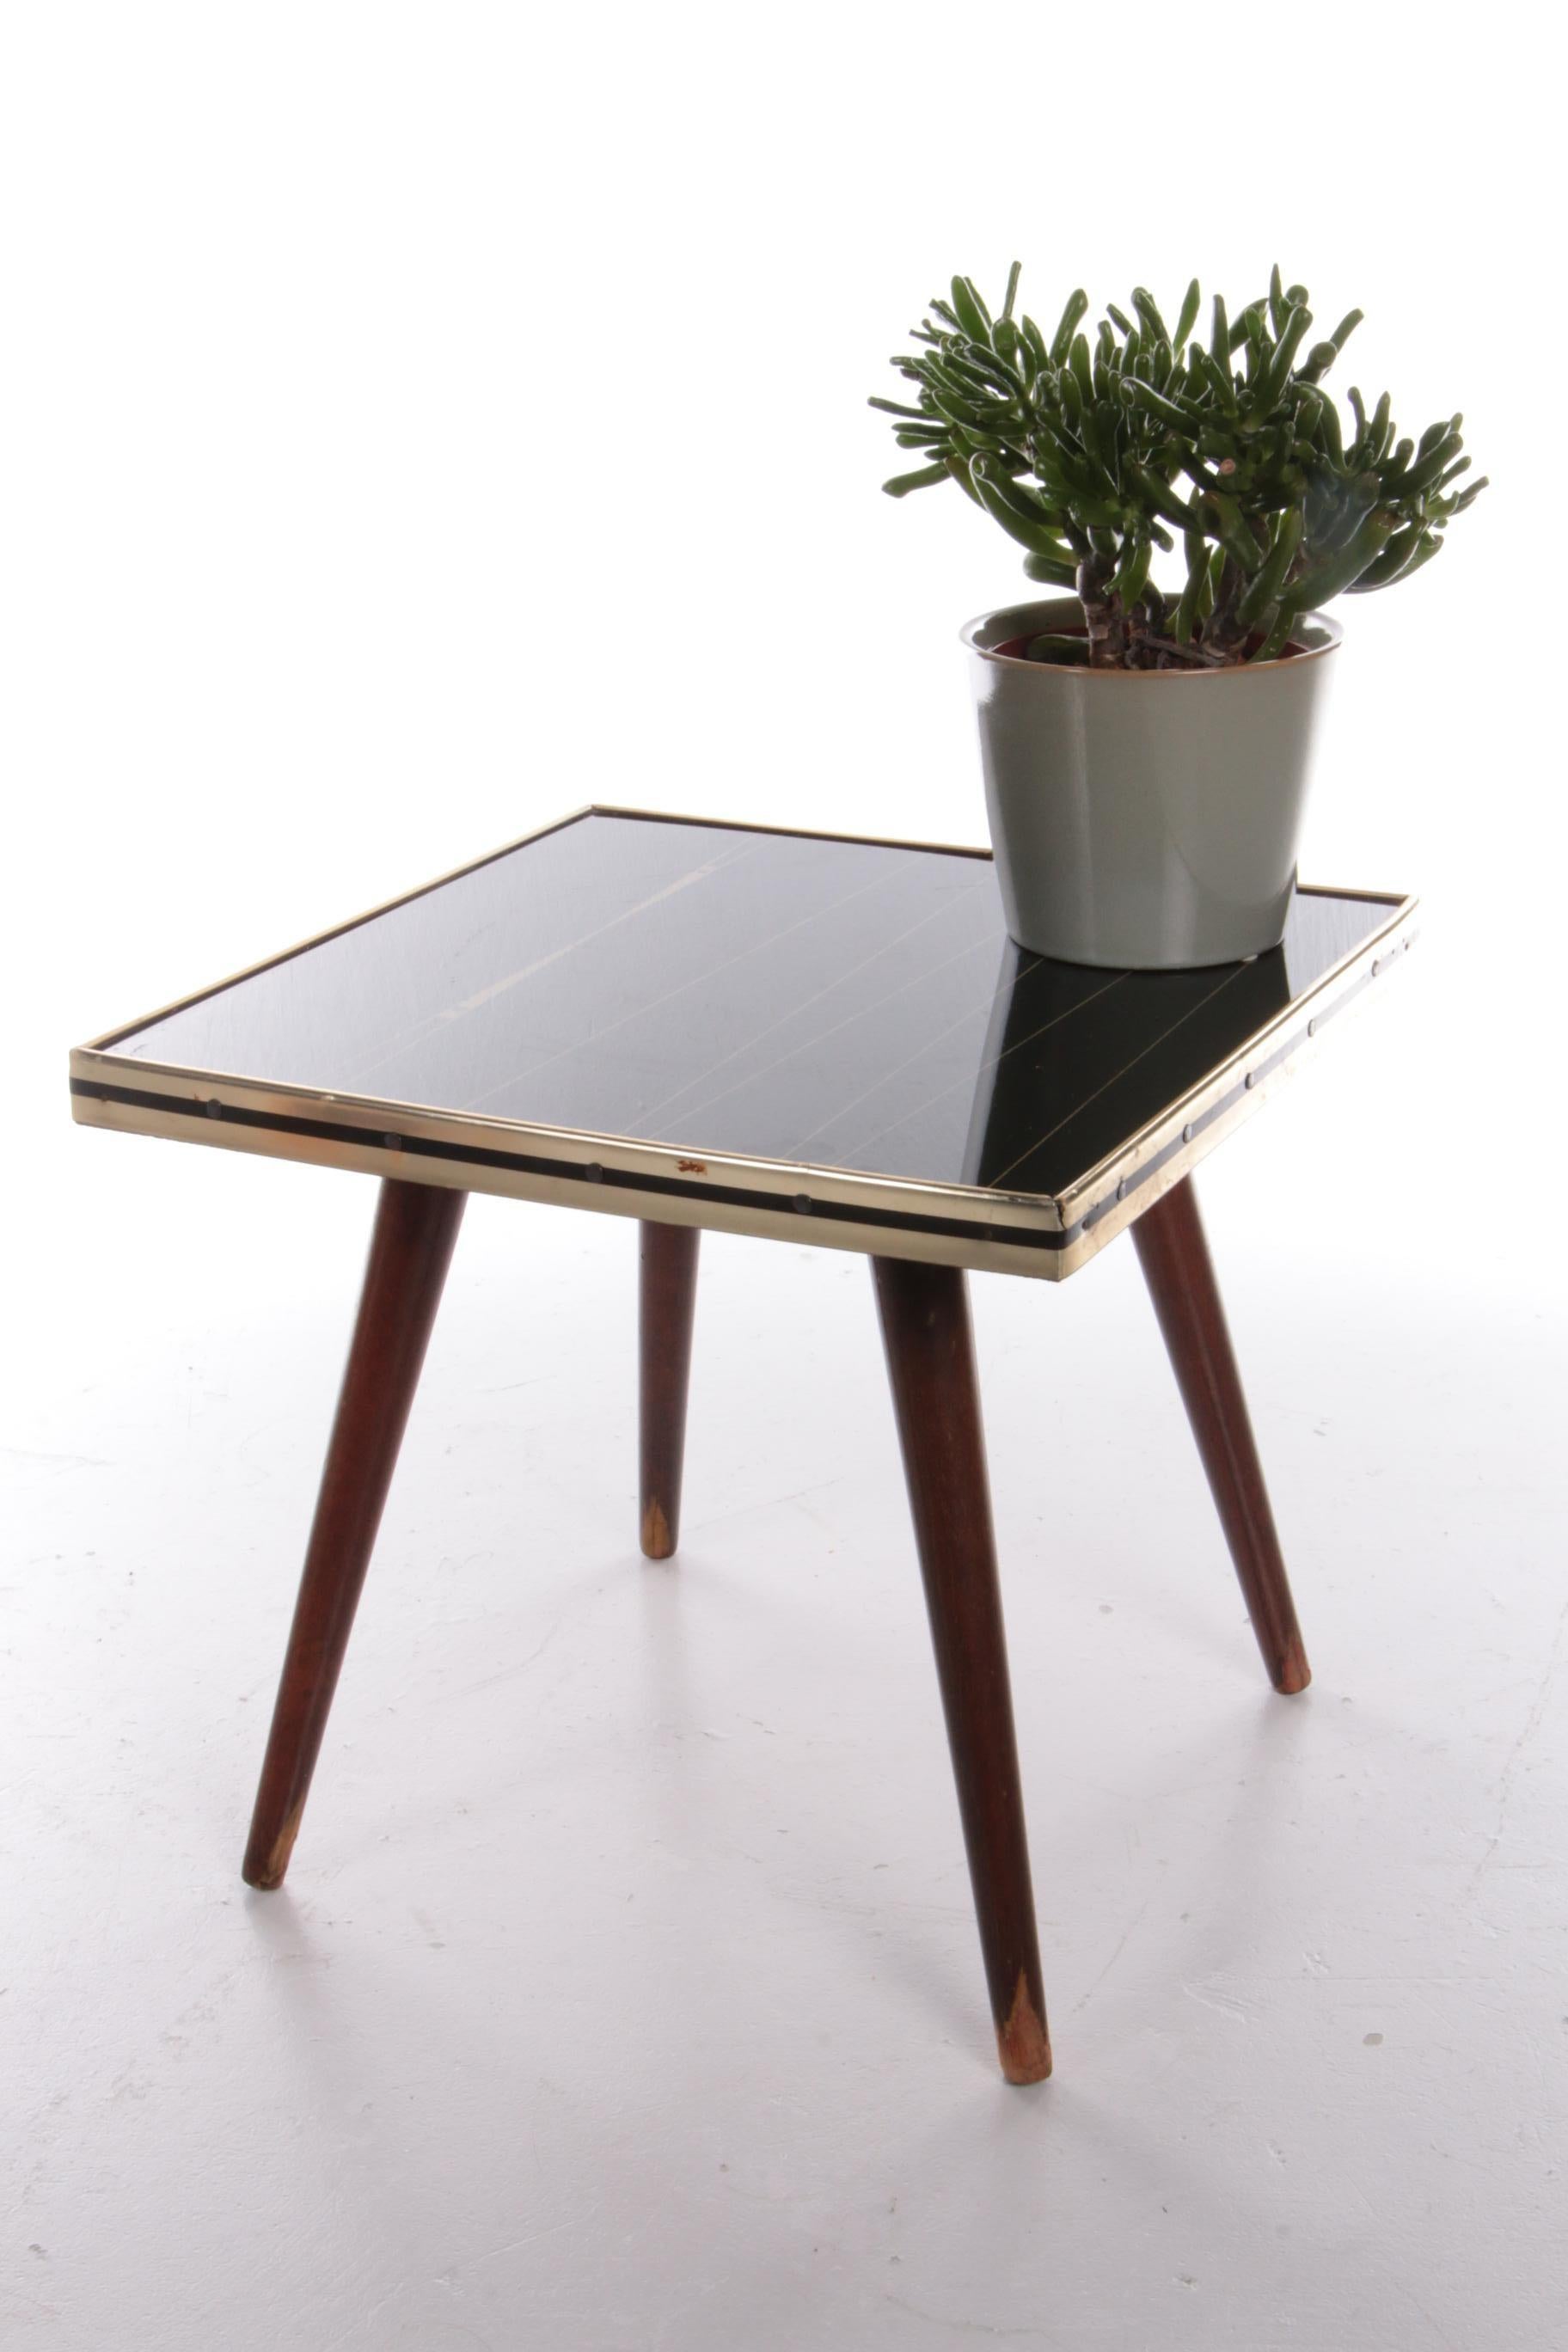 Vintage plant table or side table from the 1960s


Beautiful vintage table, to be used as a side table or as a plant table.

Nice Model with black glass top, a table with 4 legs.

The blade is black with gold details.

The condition is good